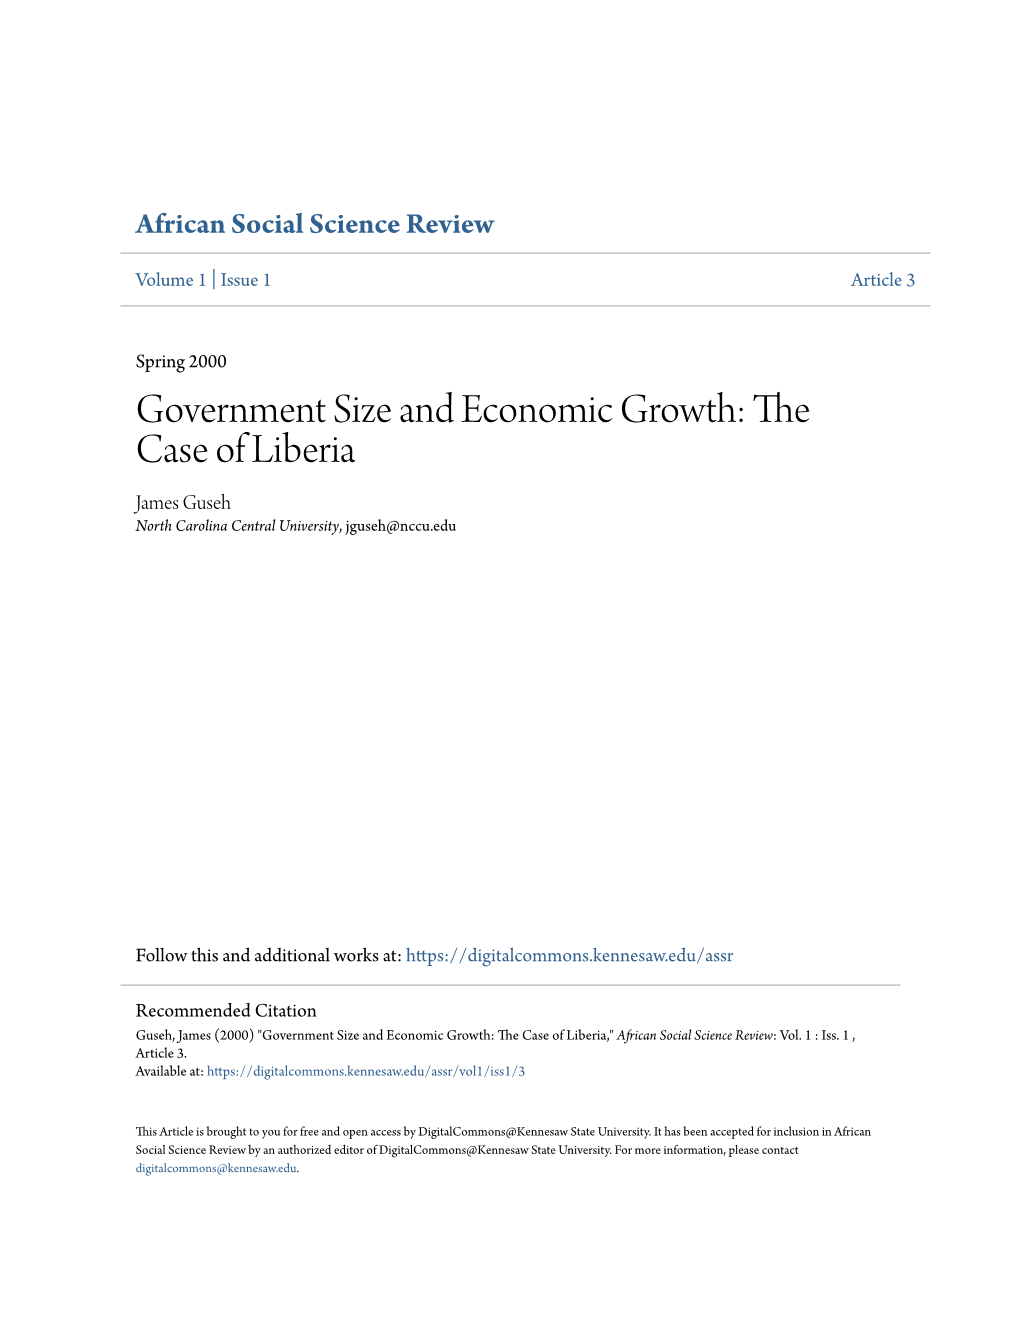 Government Size and Economic Growth: the Case of Liberia James Guseh North Carolina Central University, Jguseh@Nccu.Edu